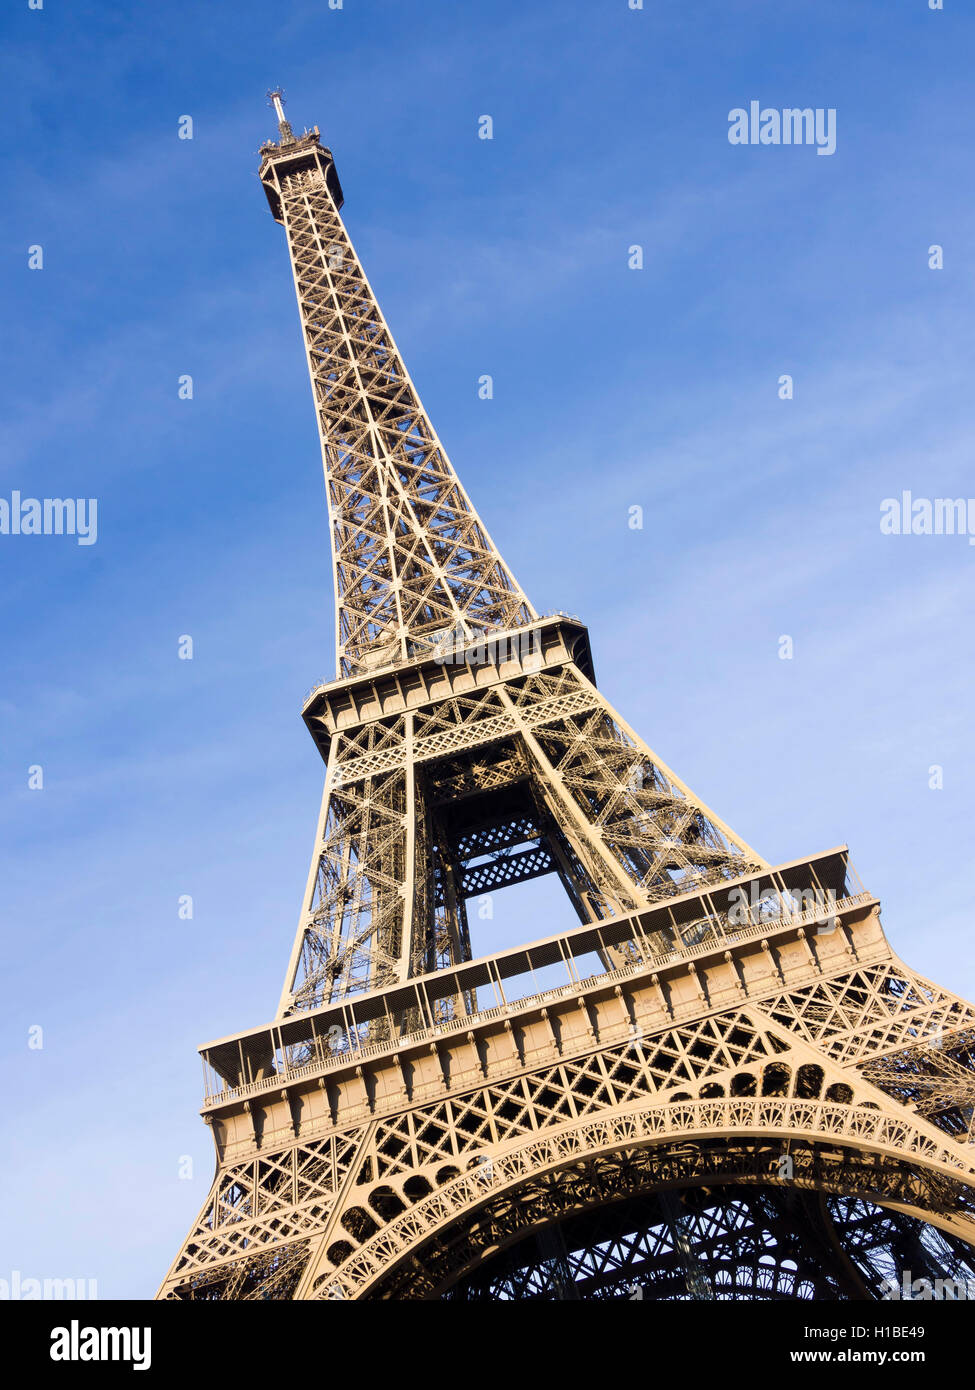 The Eiffel tower in Paris France Stock Photo